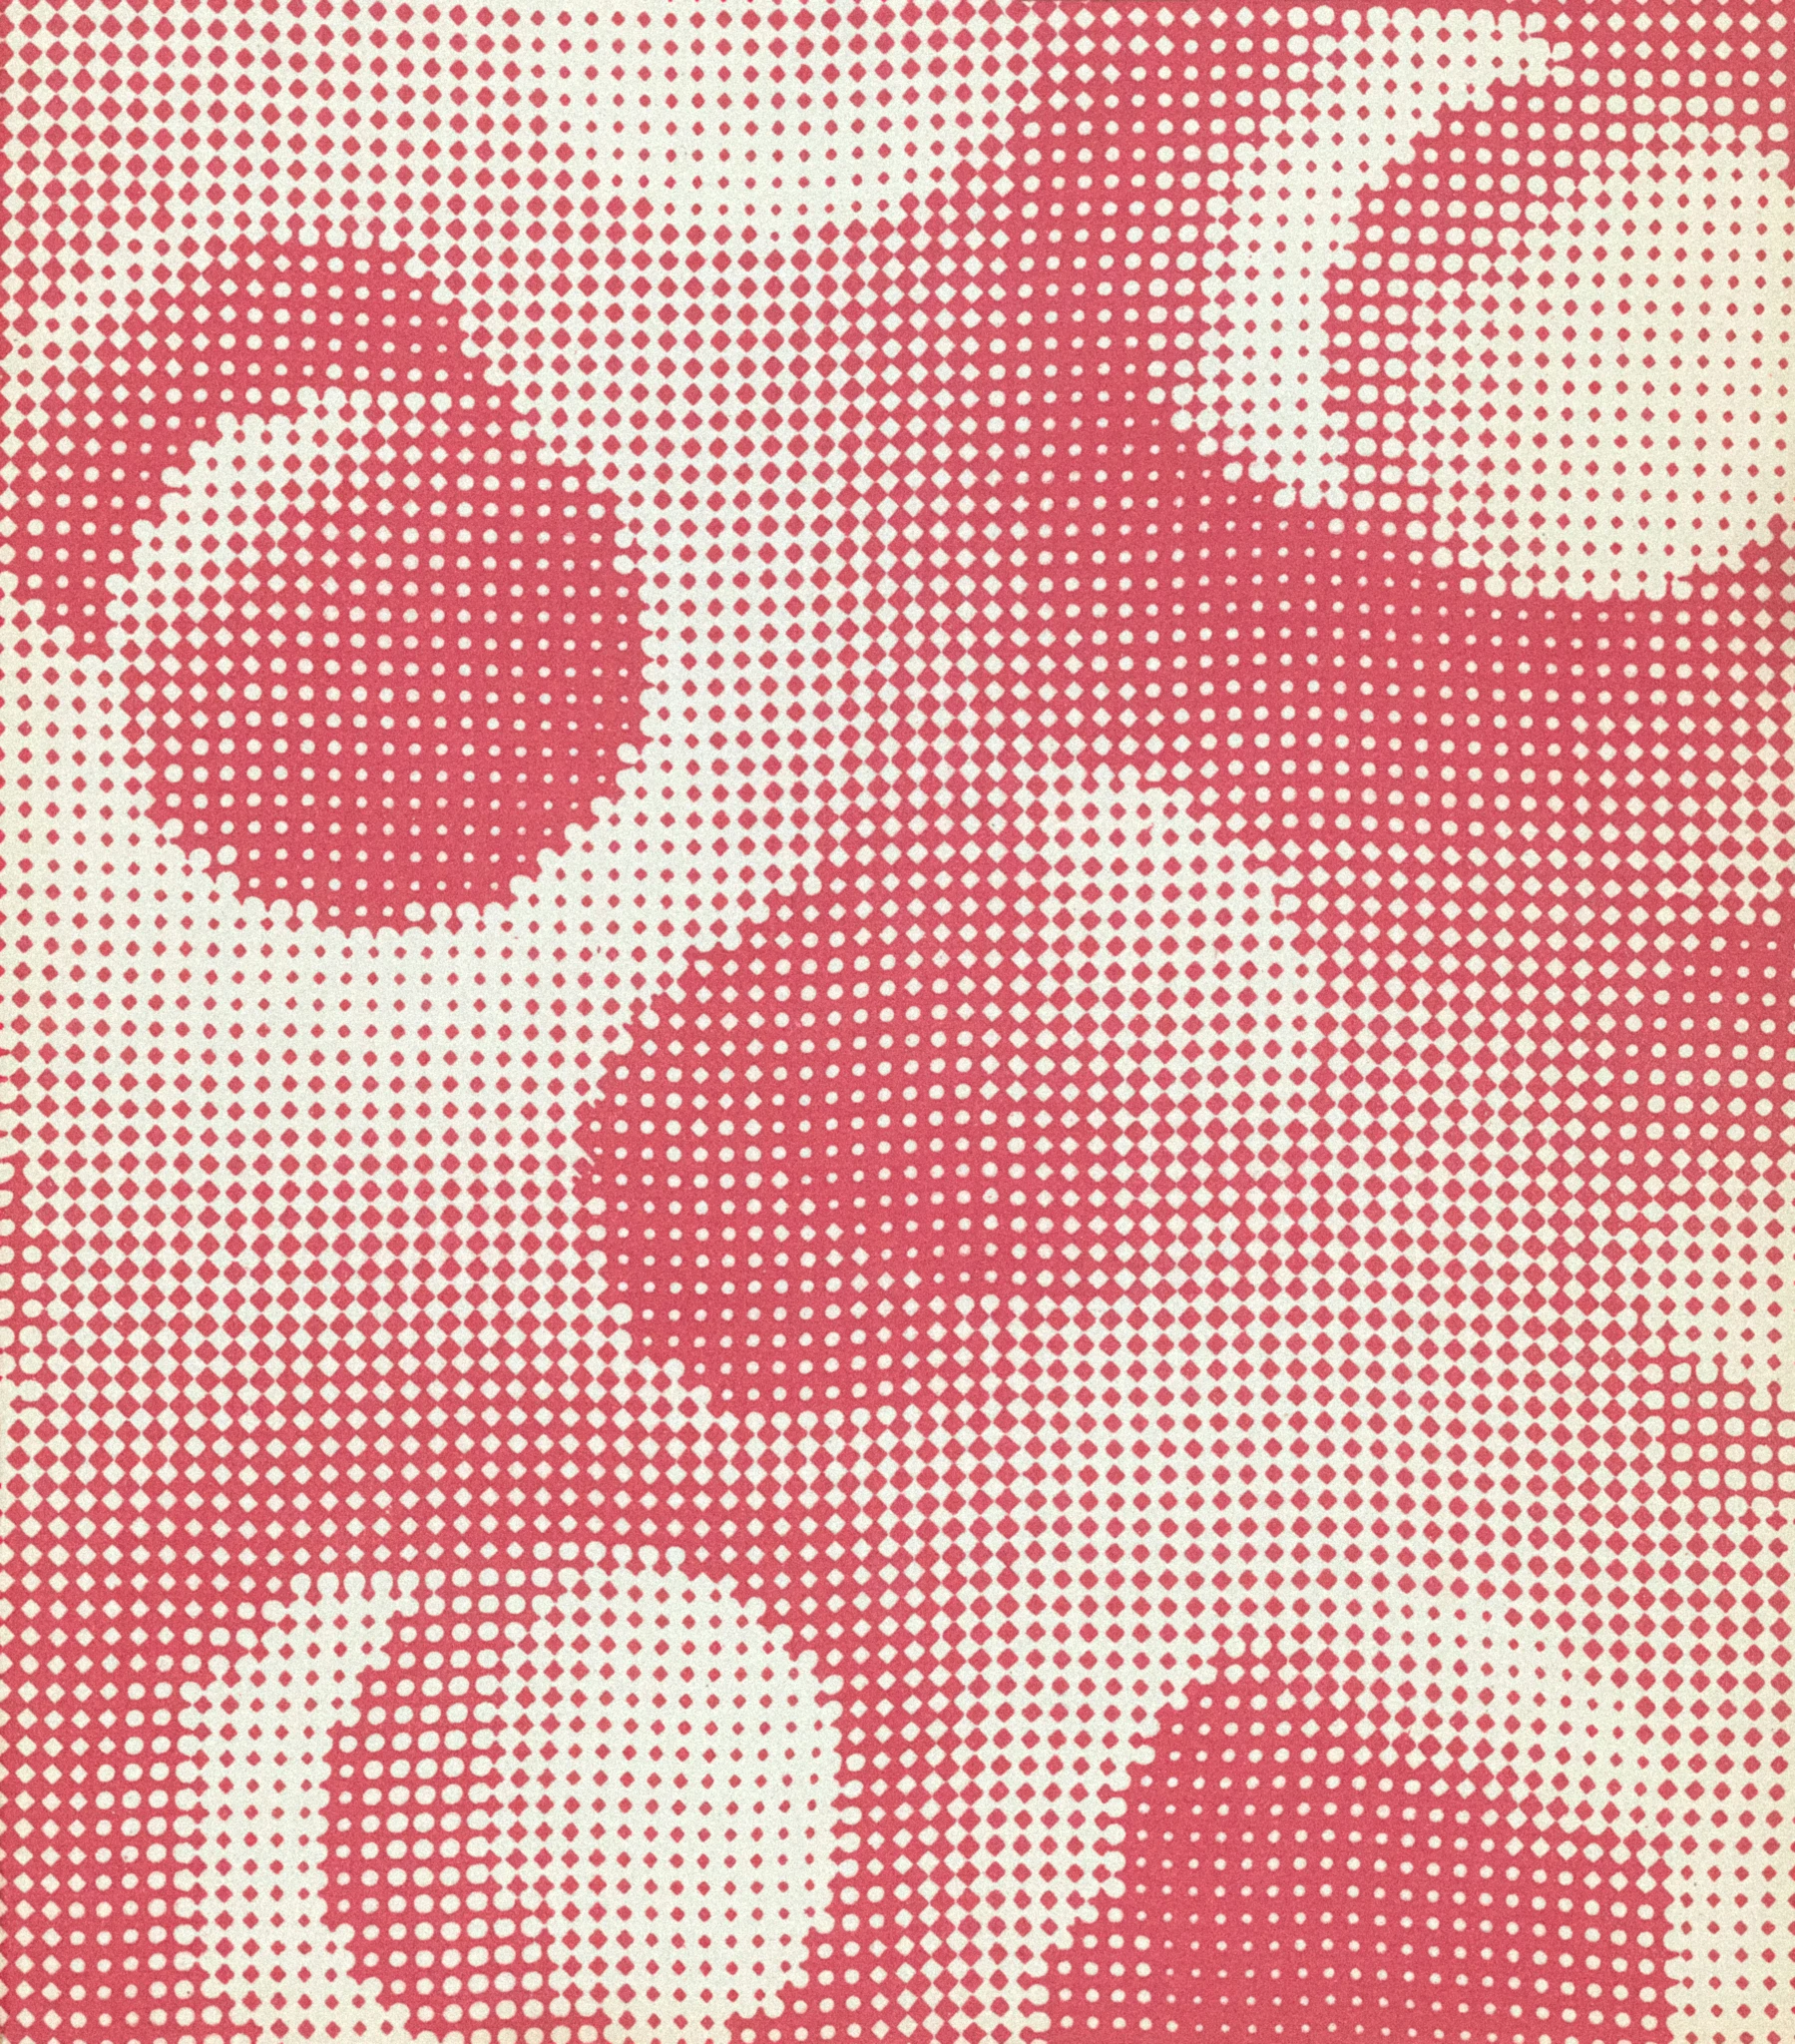 white circles with bright pink background